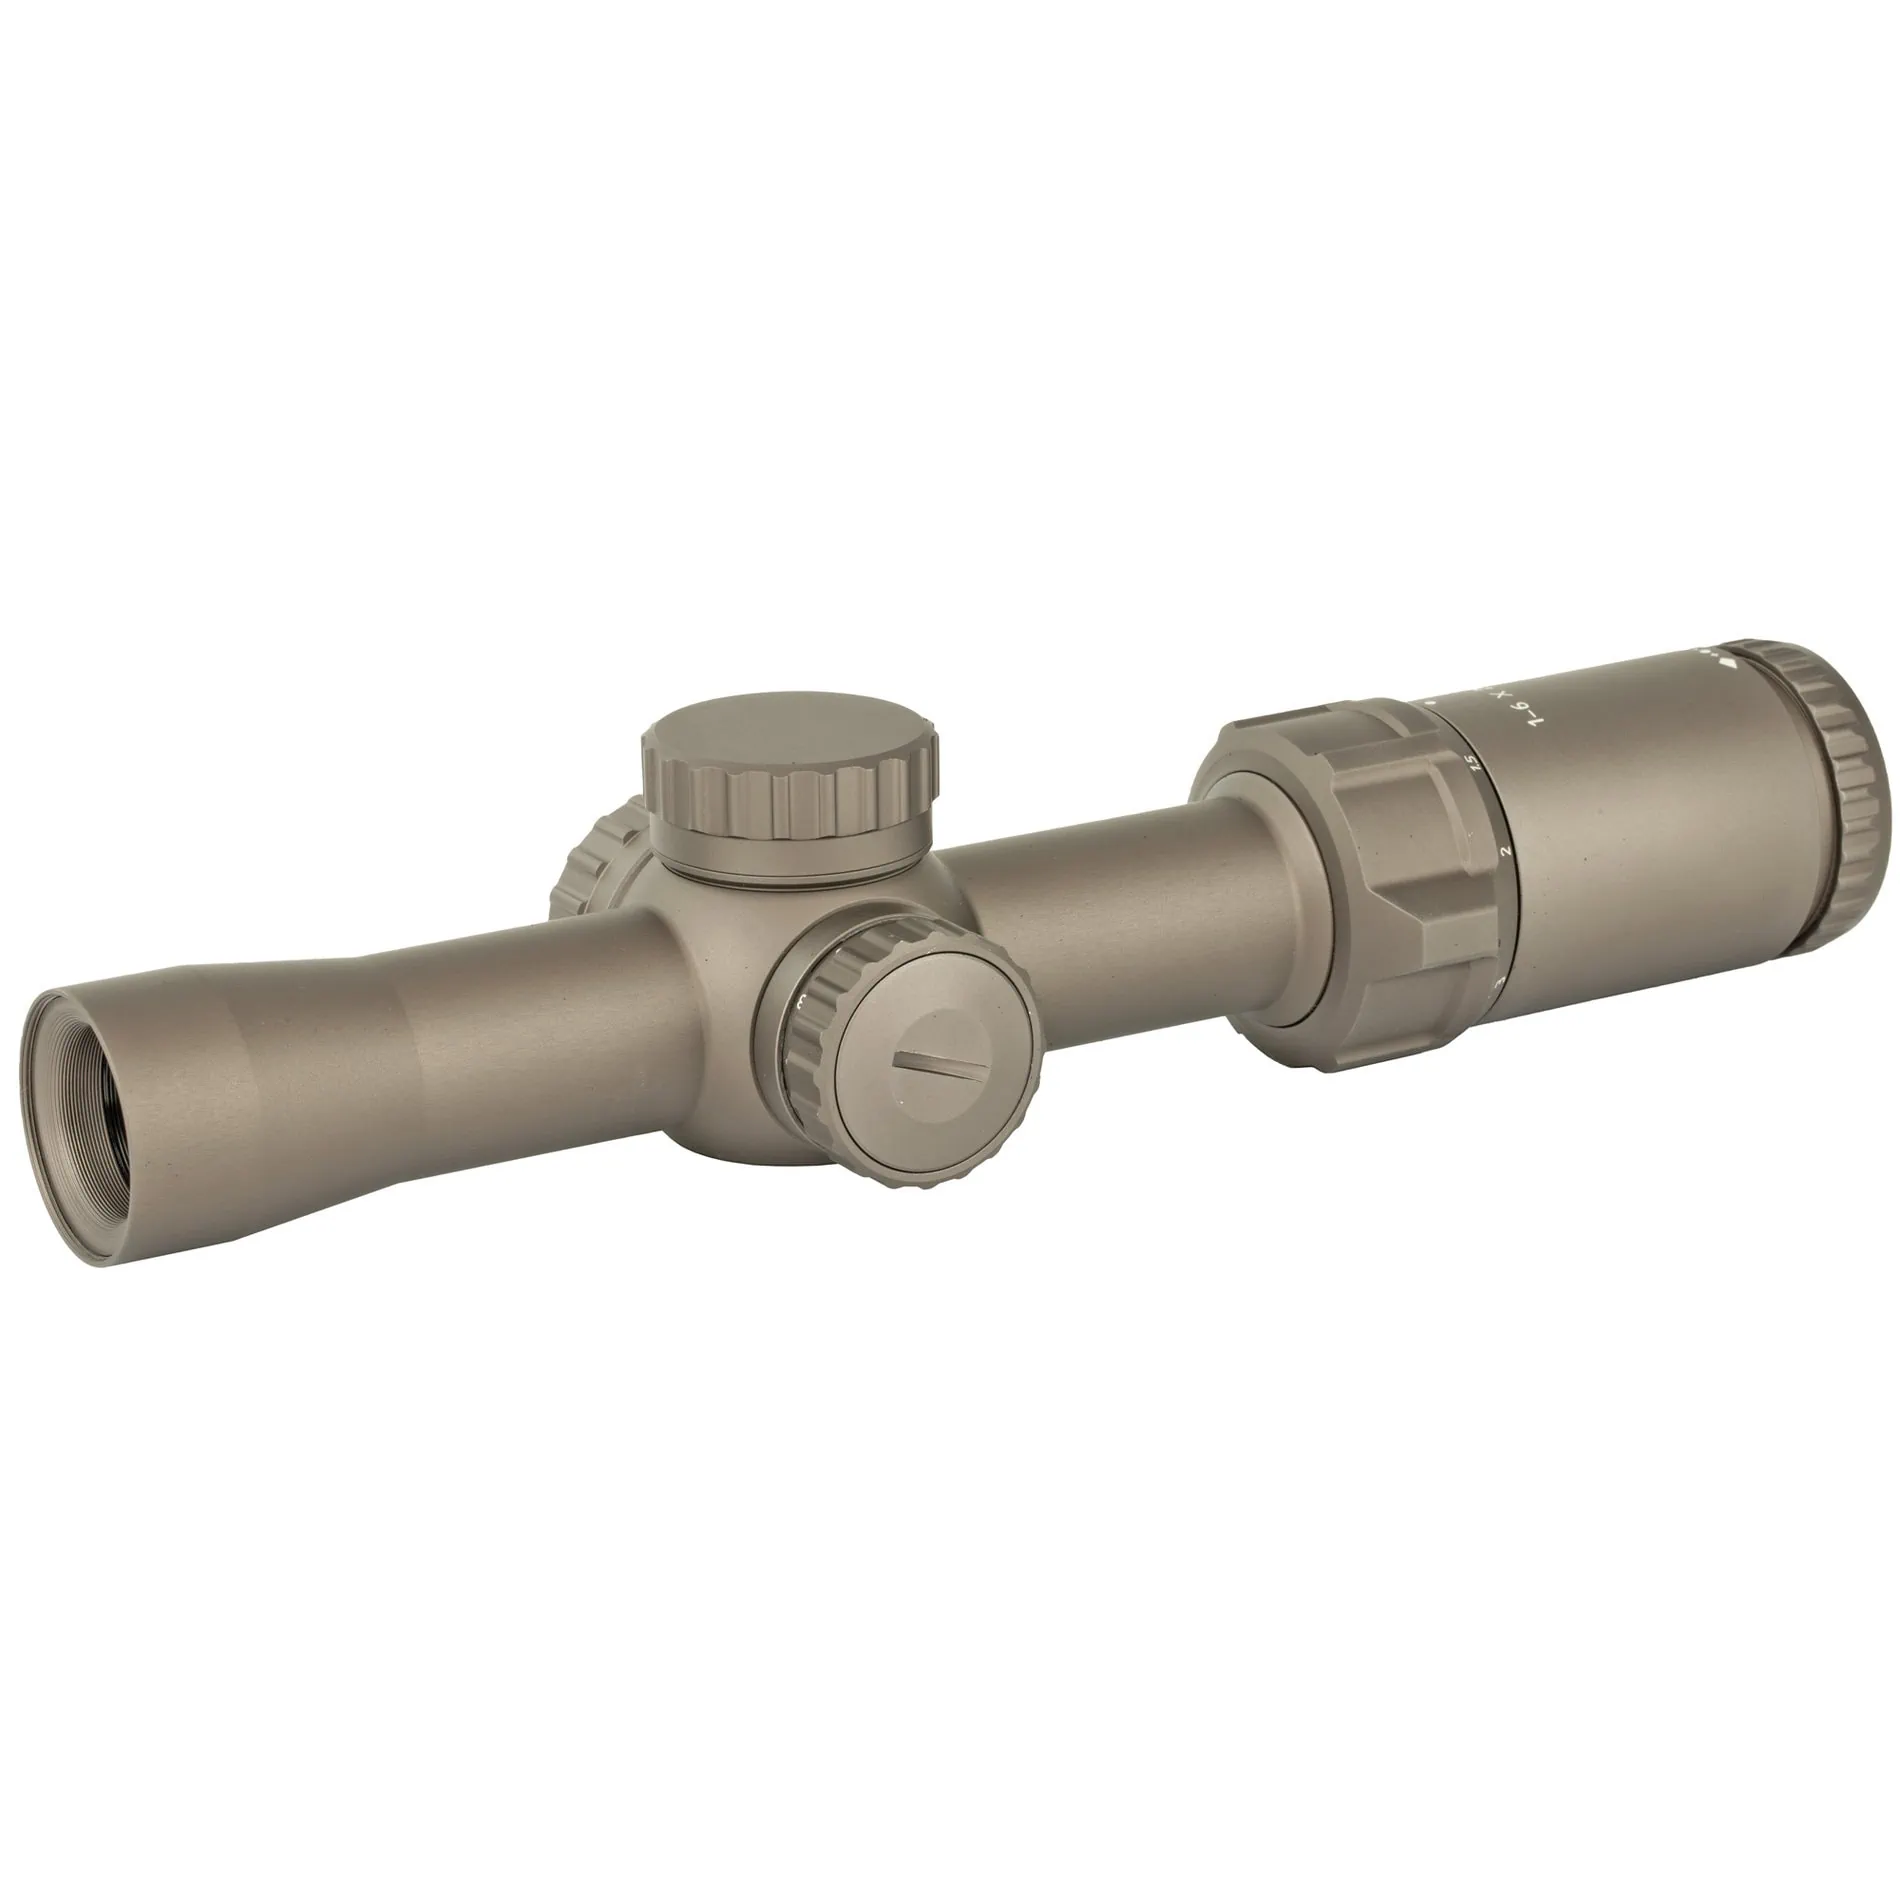 Geissele Automatics Super Precision 1-6x26 Scope with 30mm Tube - AT3 Tactical